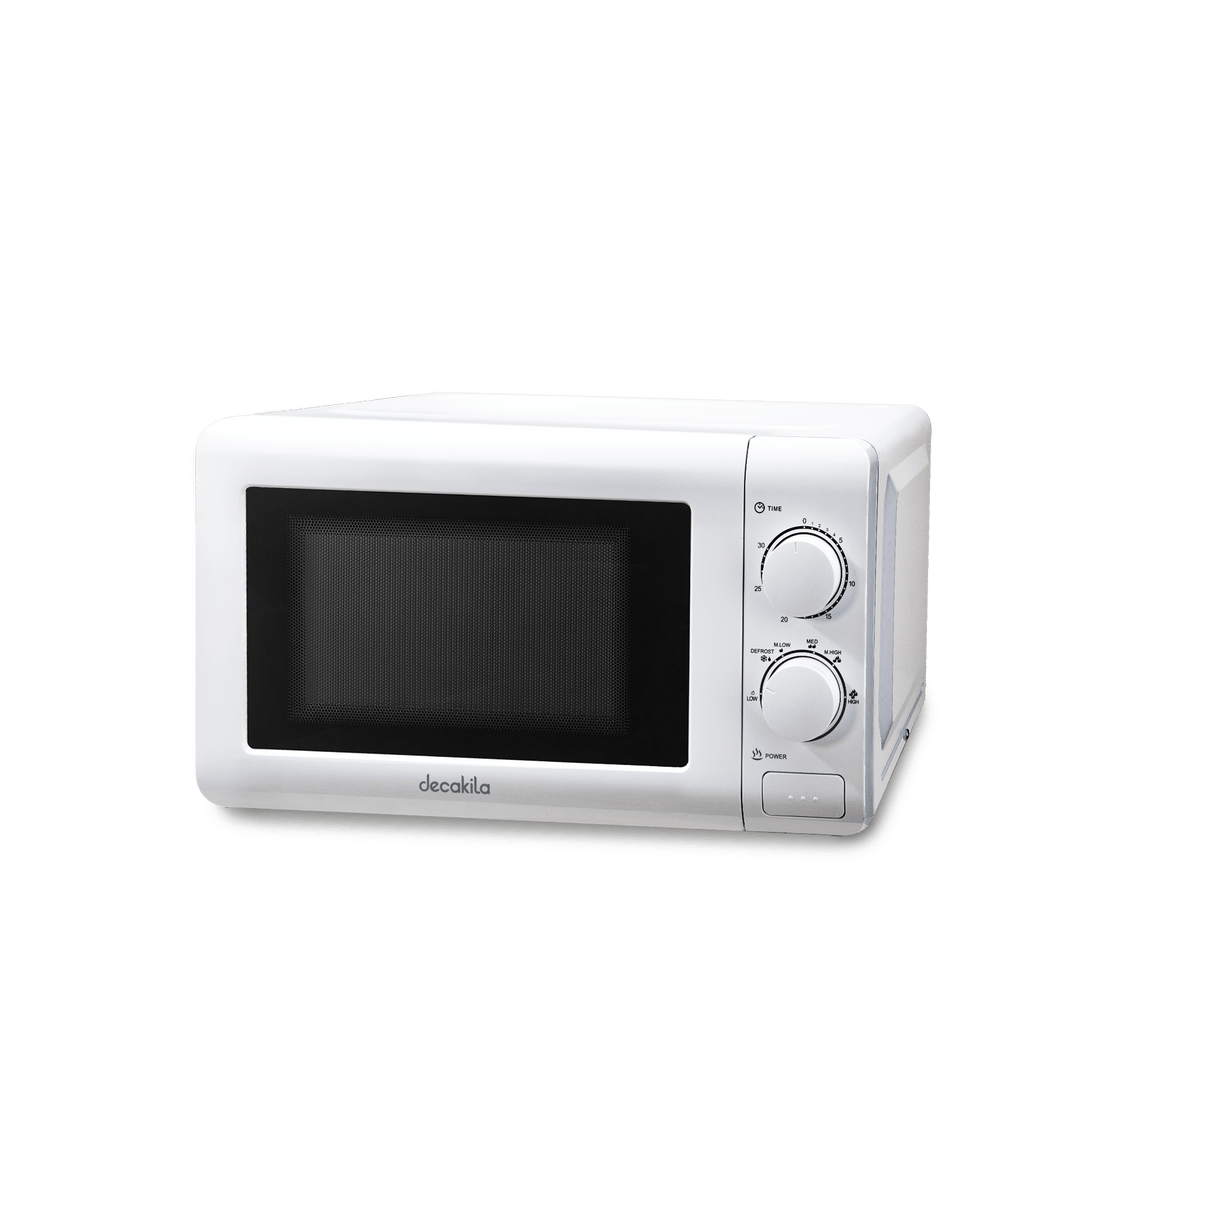 Decakila 20L Microwave Oven 700W - KEMC007W | Buy Online in Accra, Ghana - Supply Master Kitchen Appliances Buy Tools hardware Building materials